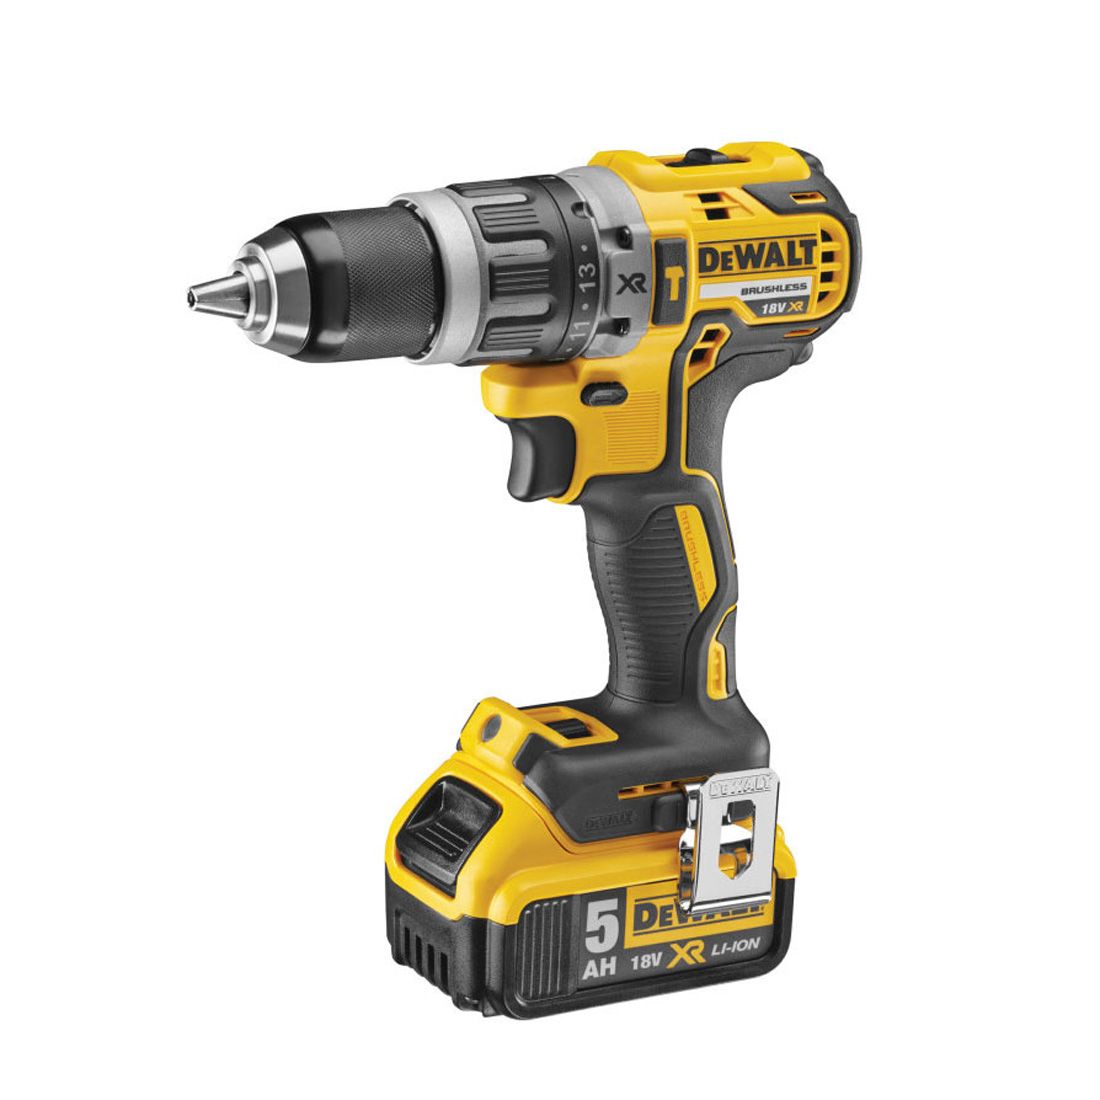 DeWalt DCD996P1 18V XR Brushless 3 speed Hammer Drill Driver, 5.0Ah Battery, Charger And Case